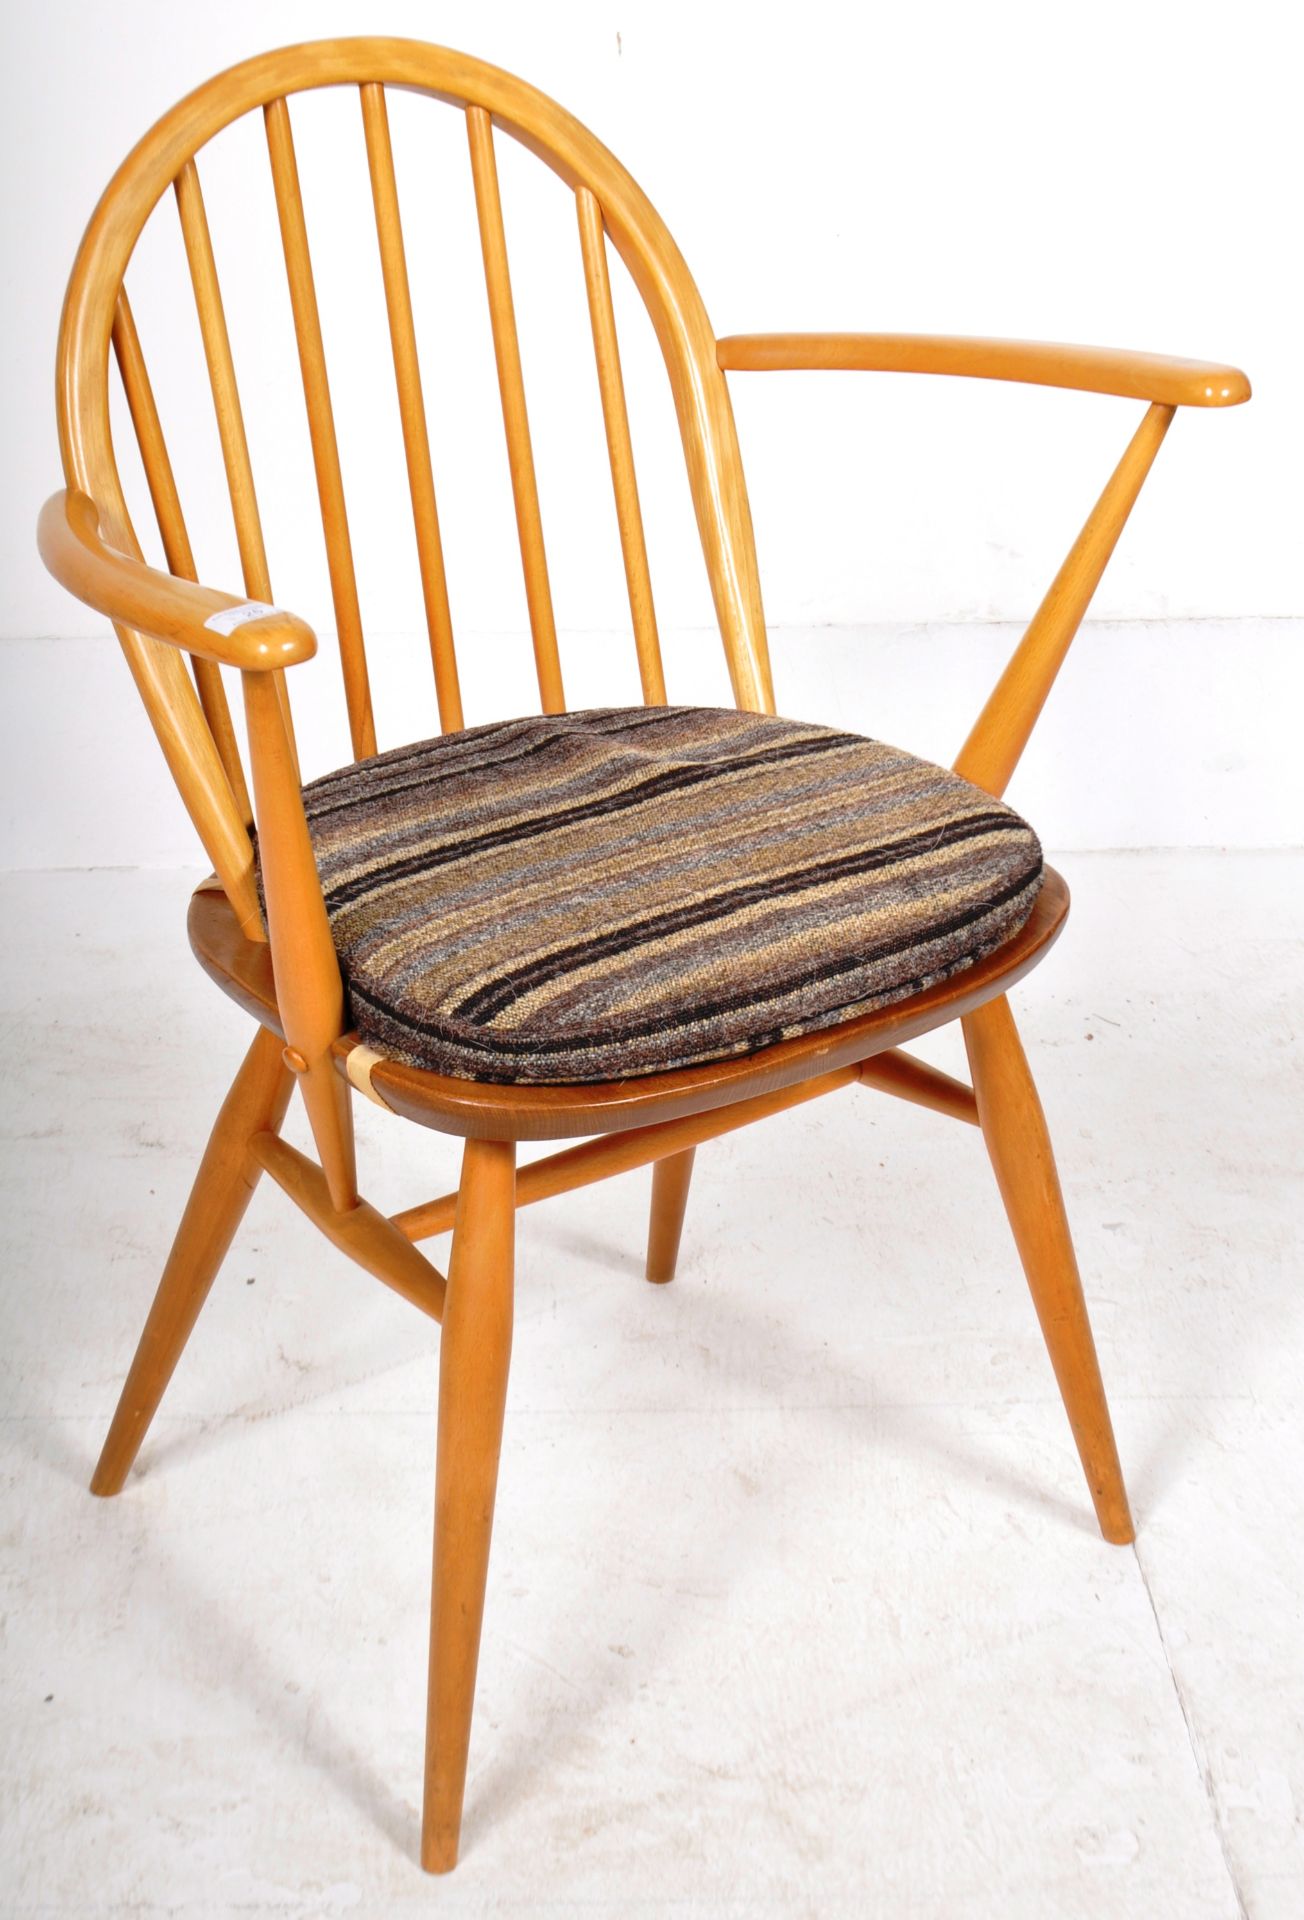 ERCOL - WINDSOR MODEL - 60'S BEACH AND ELM CARVER ARMCHAIR - Image 10 of 10